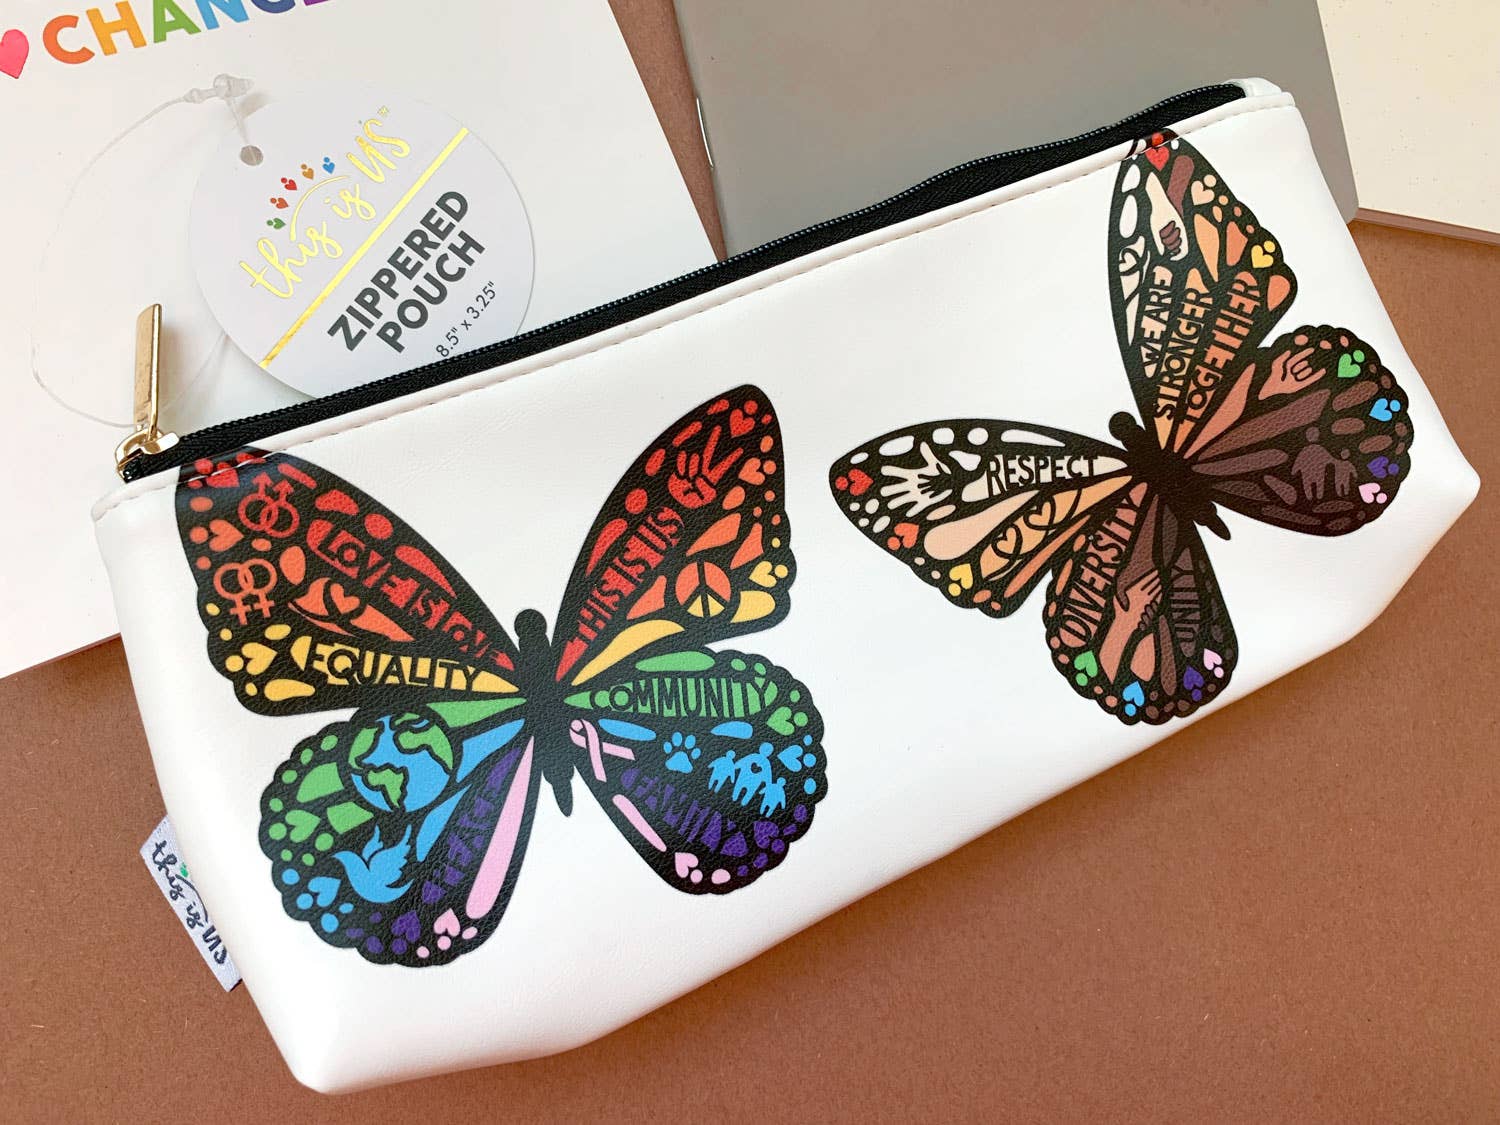 Butterflies Pouch - SuperMom Headquarters